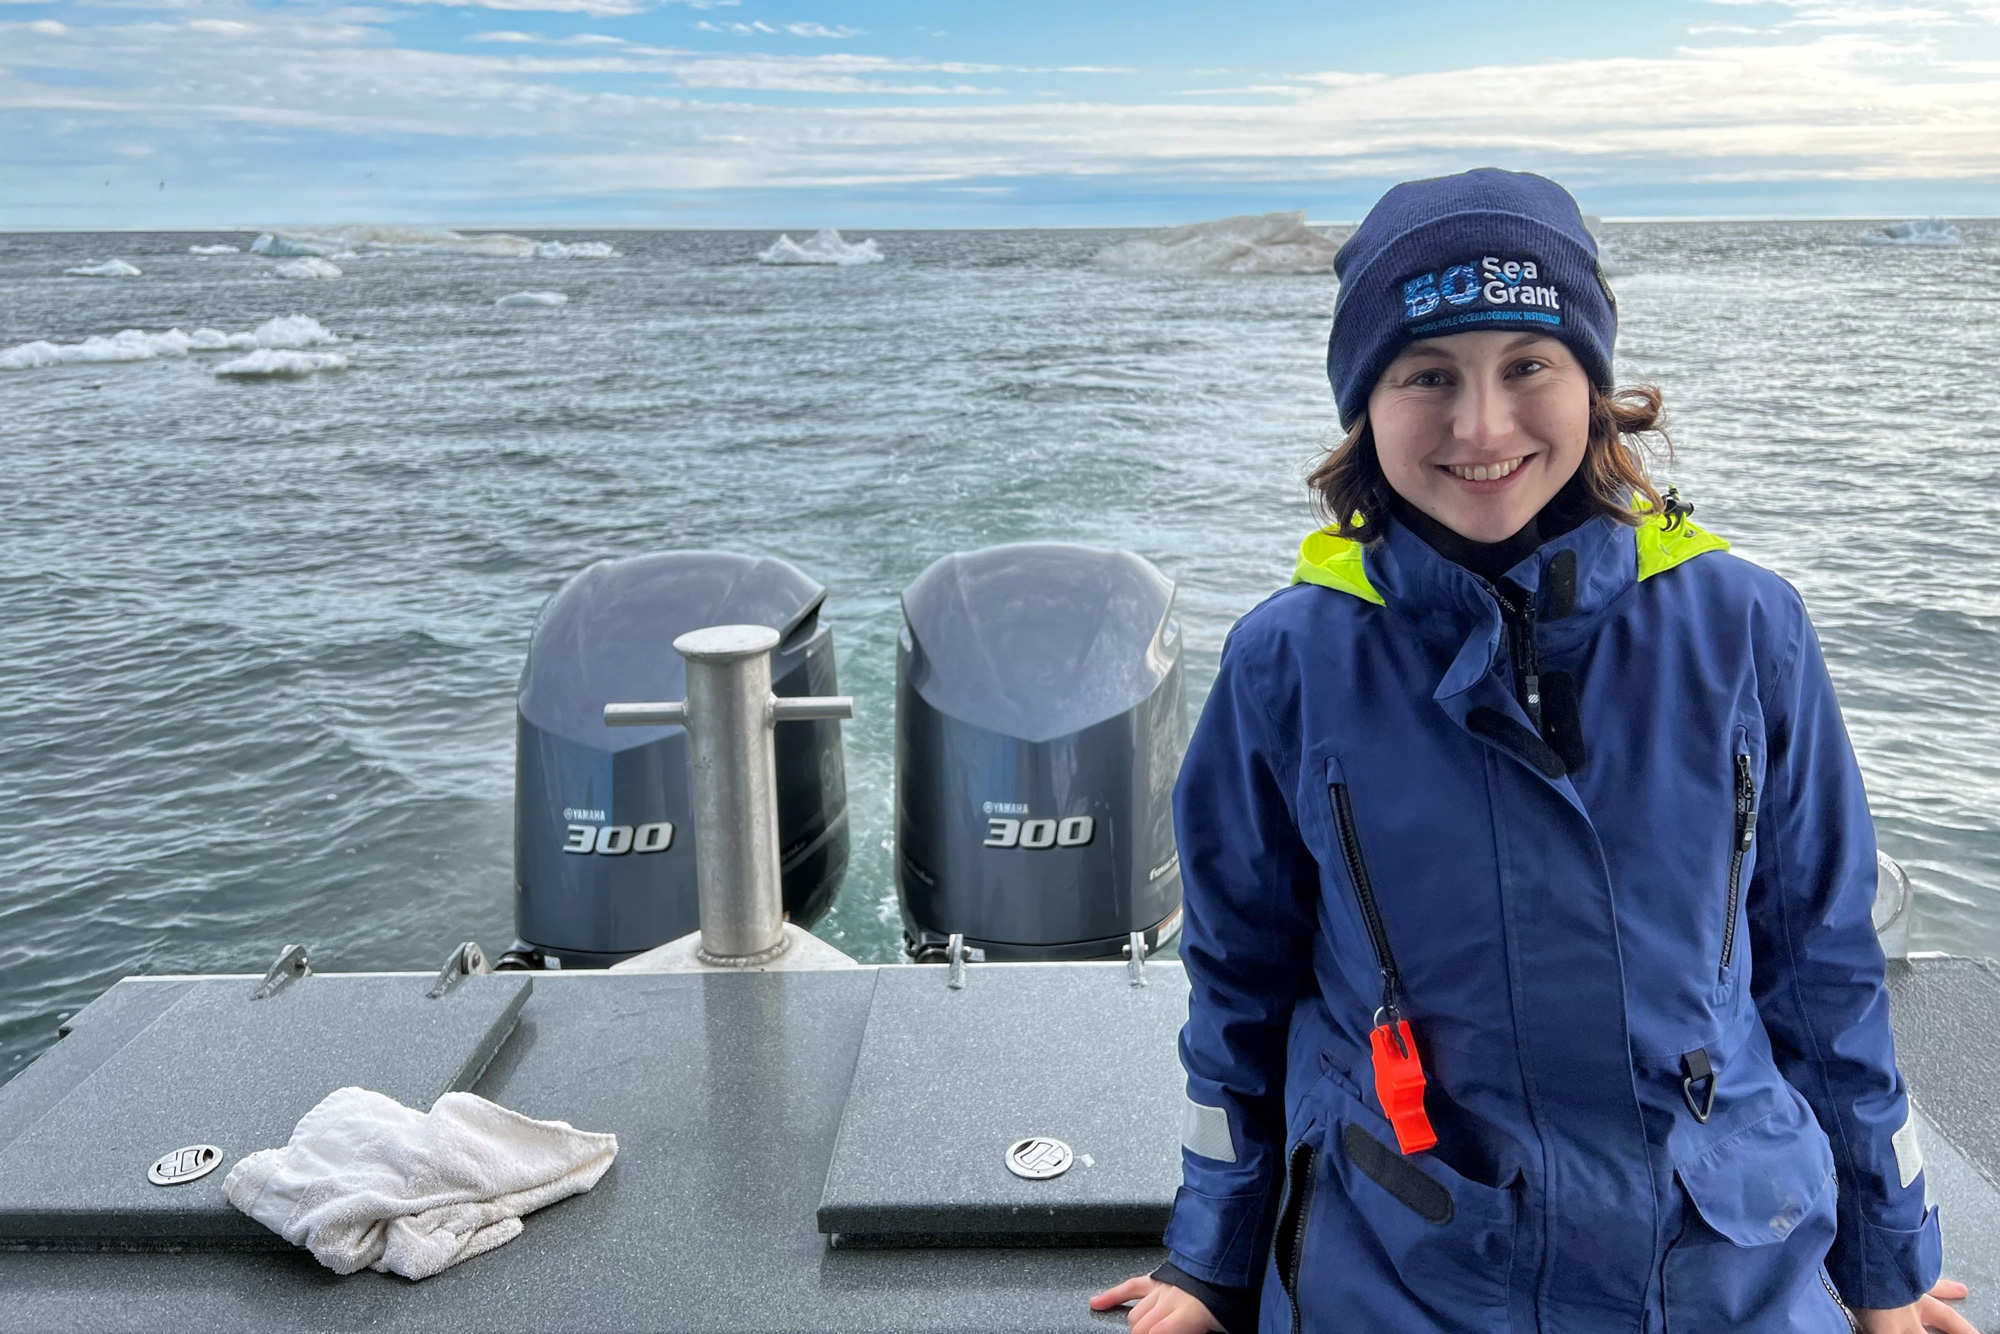 During a near-shore Beaufort Sea sampling campaign in July 2023, PhD student Emma Bullock sampled ocean water with recent meltwater inputs to test for radium isotopes, trace metals, carbon, nutrients, and mercury.